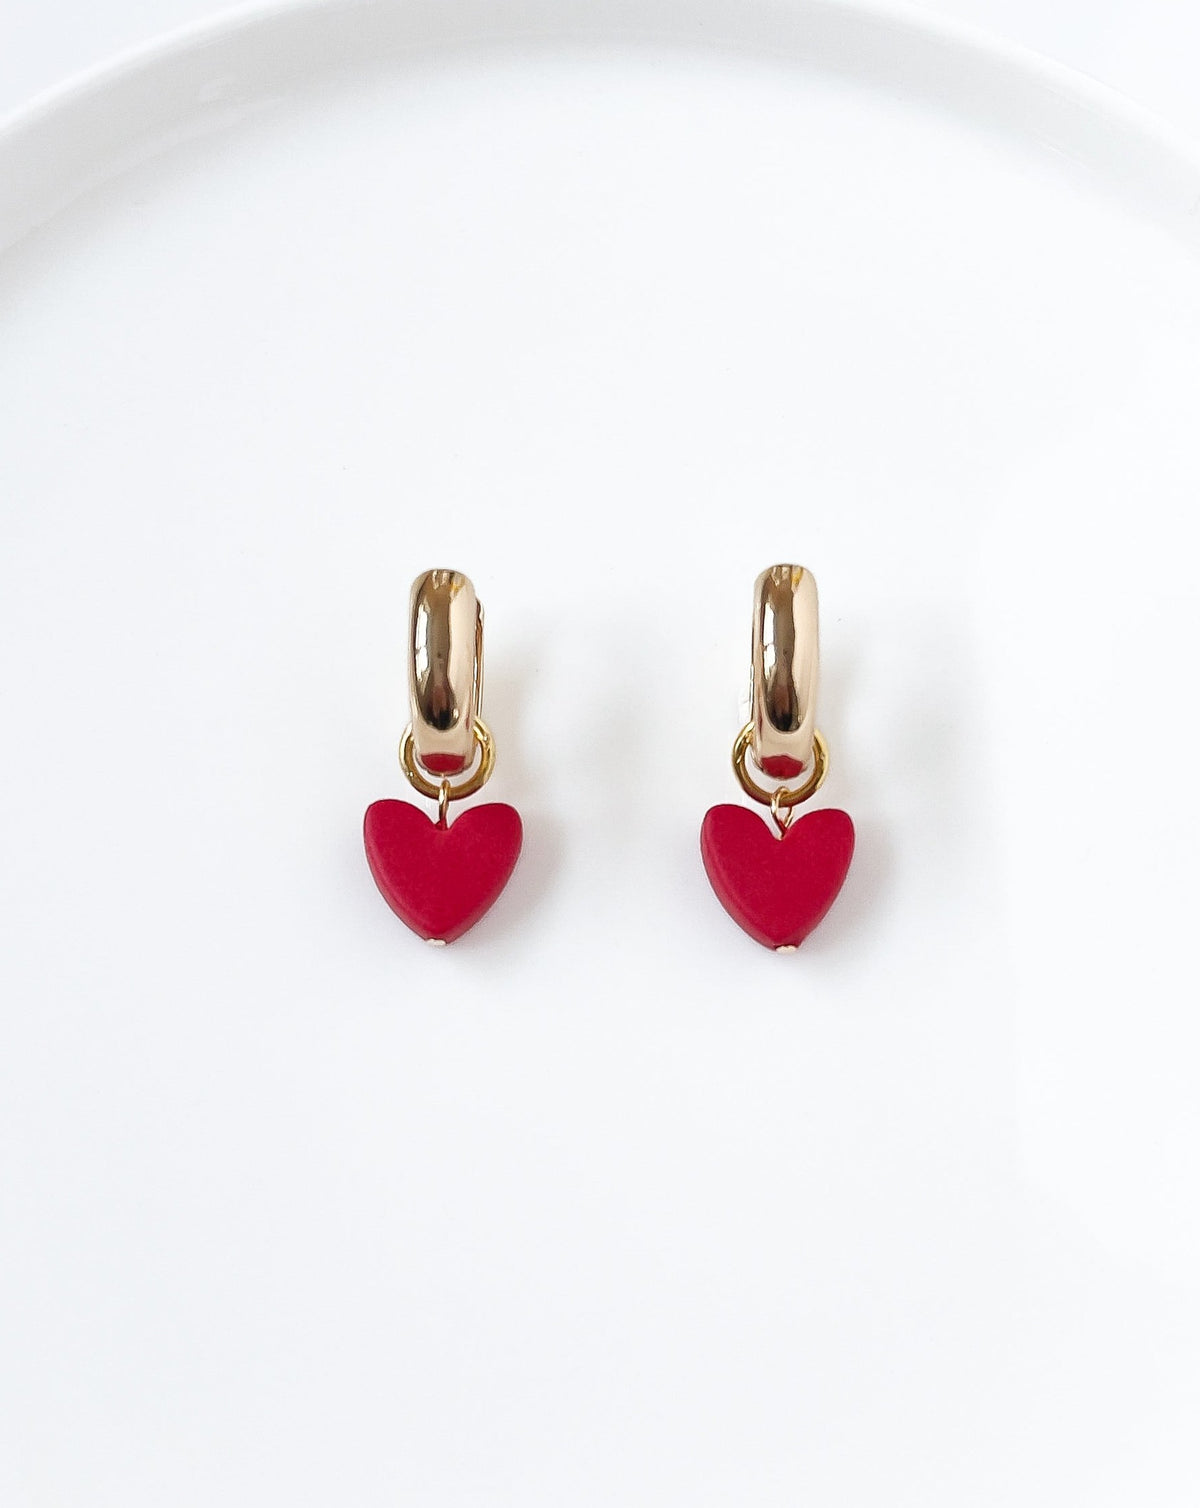 Close up of Charming Heart earrings with Gold Hoops and Red Heart charm.